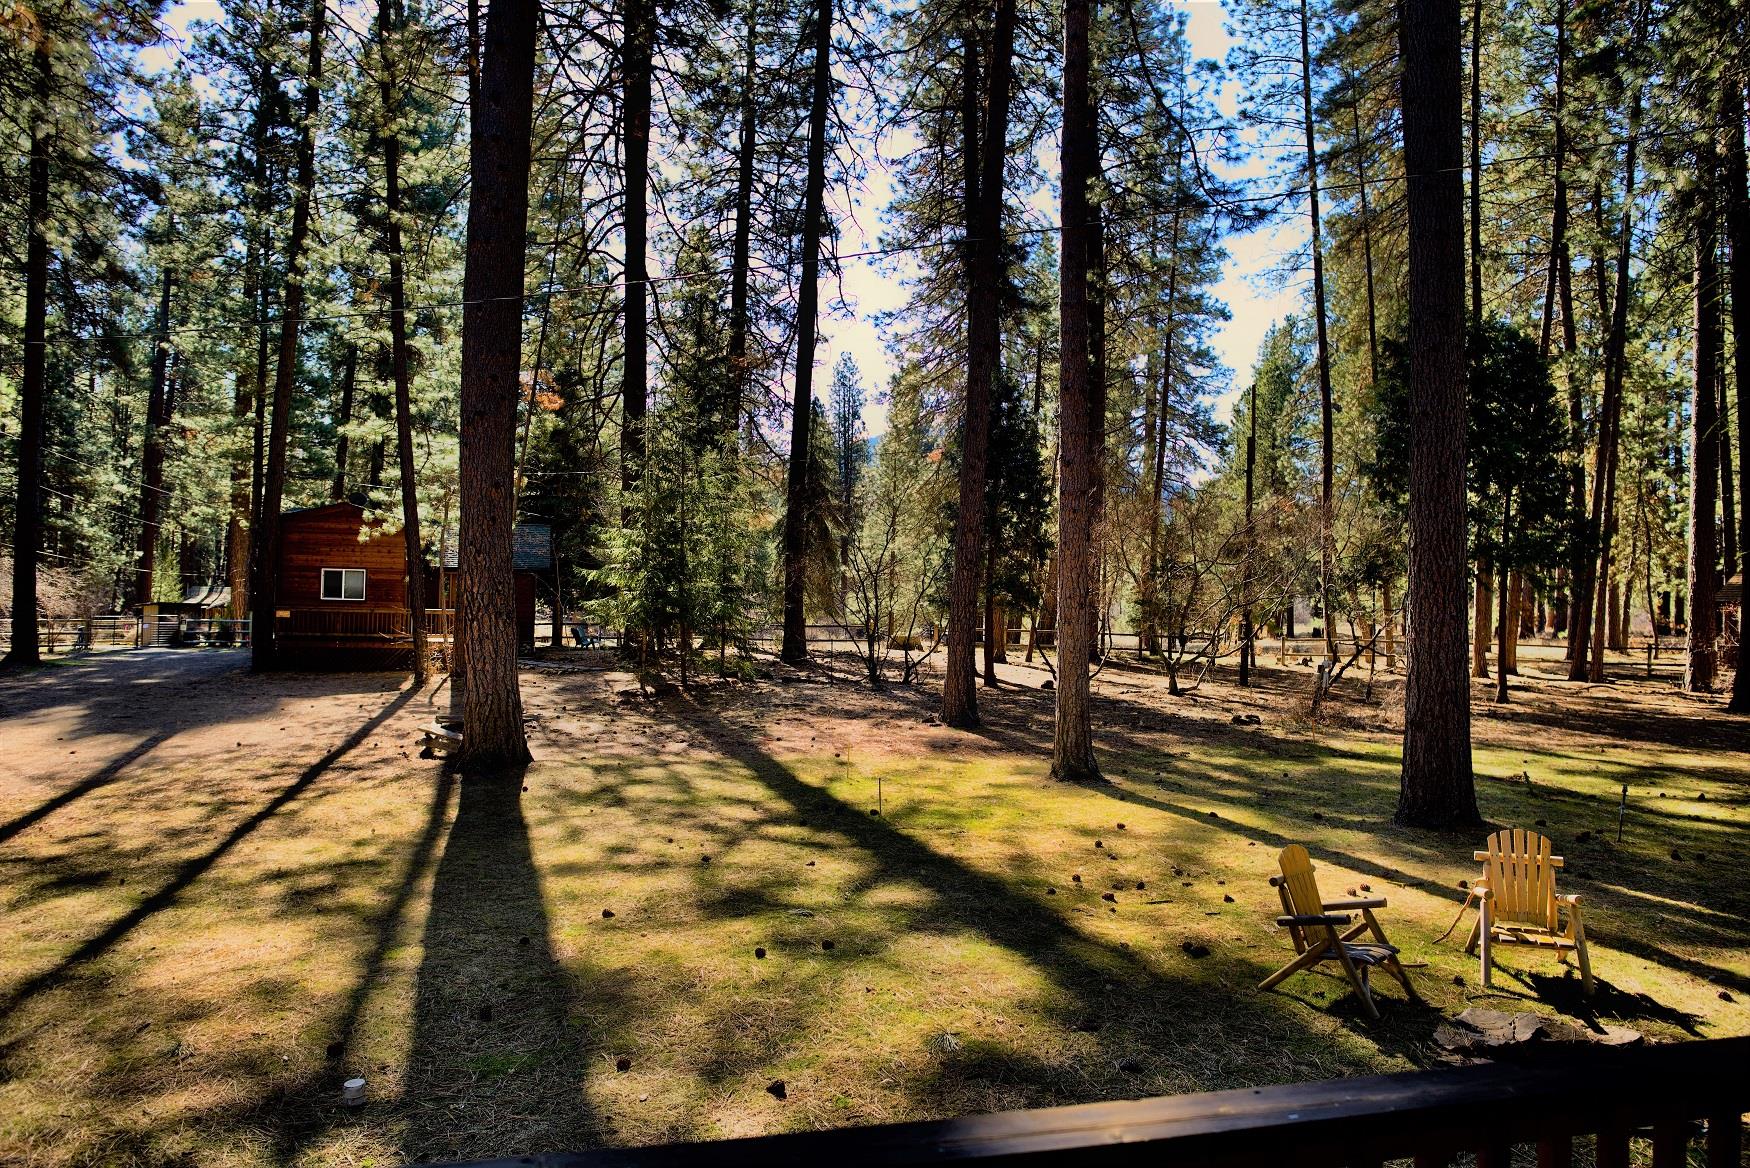 A perfect view of the Camp Sherman wilderness, off the deck of Ponderosa Cabin, at Cold Springs Resort